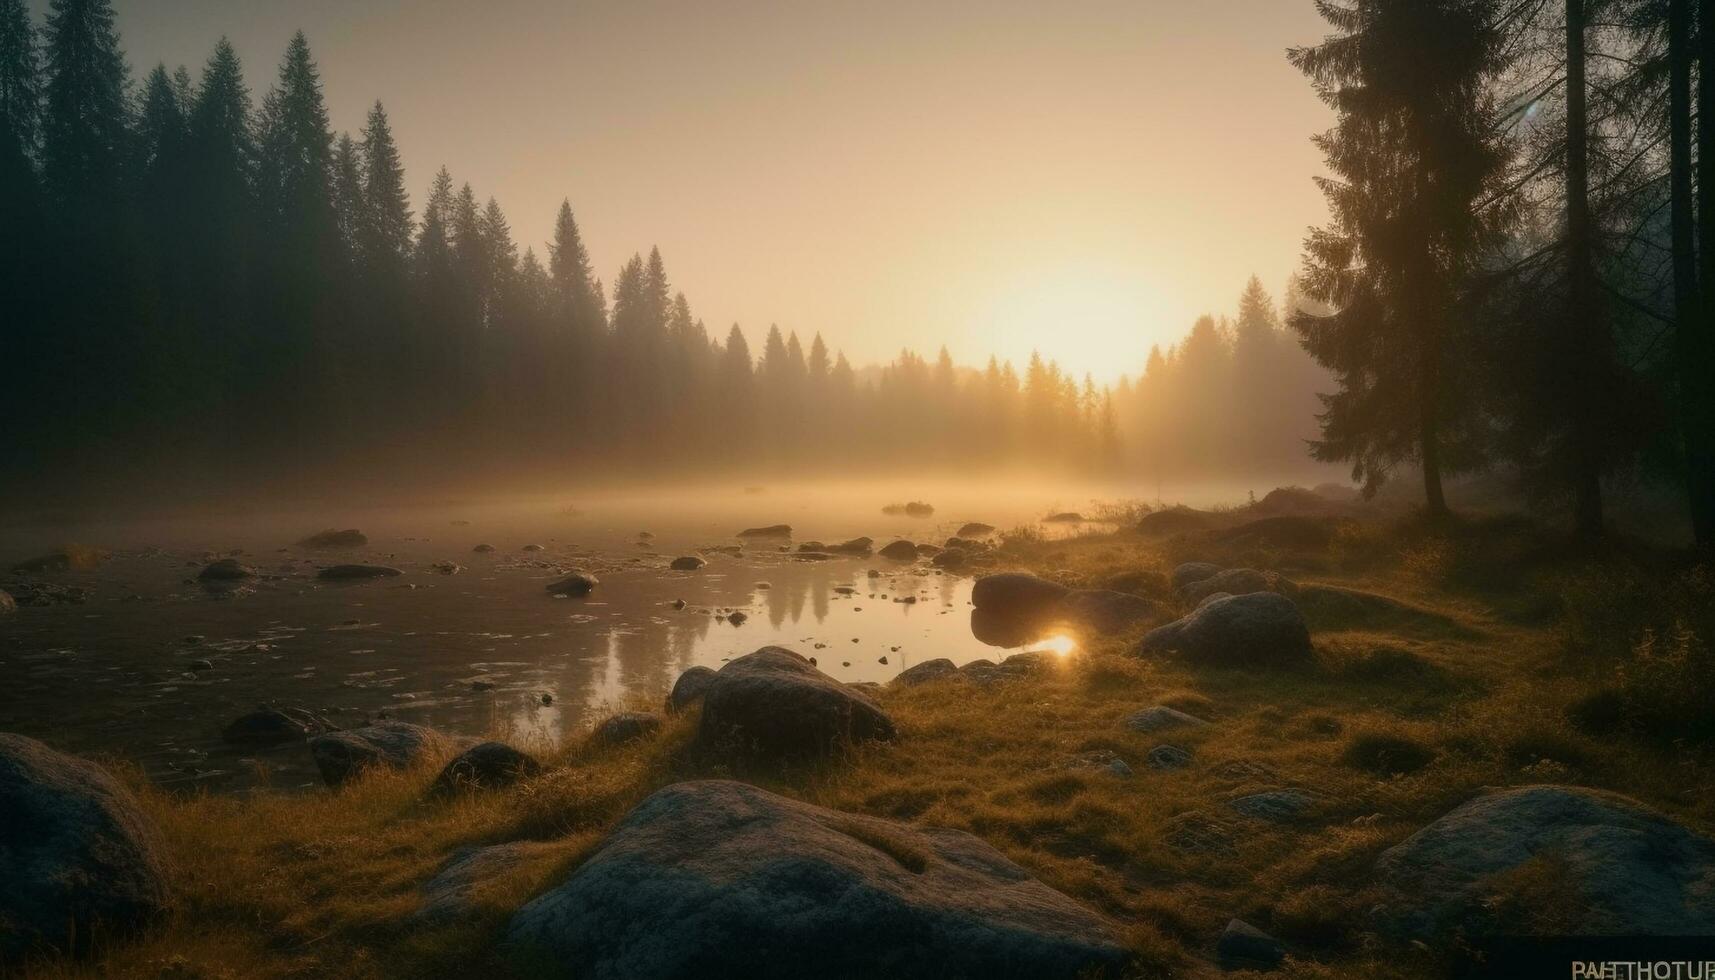 Tranquil scene of nature beauty at dawn generated by AI photo